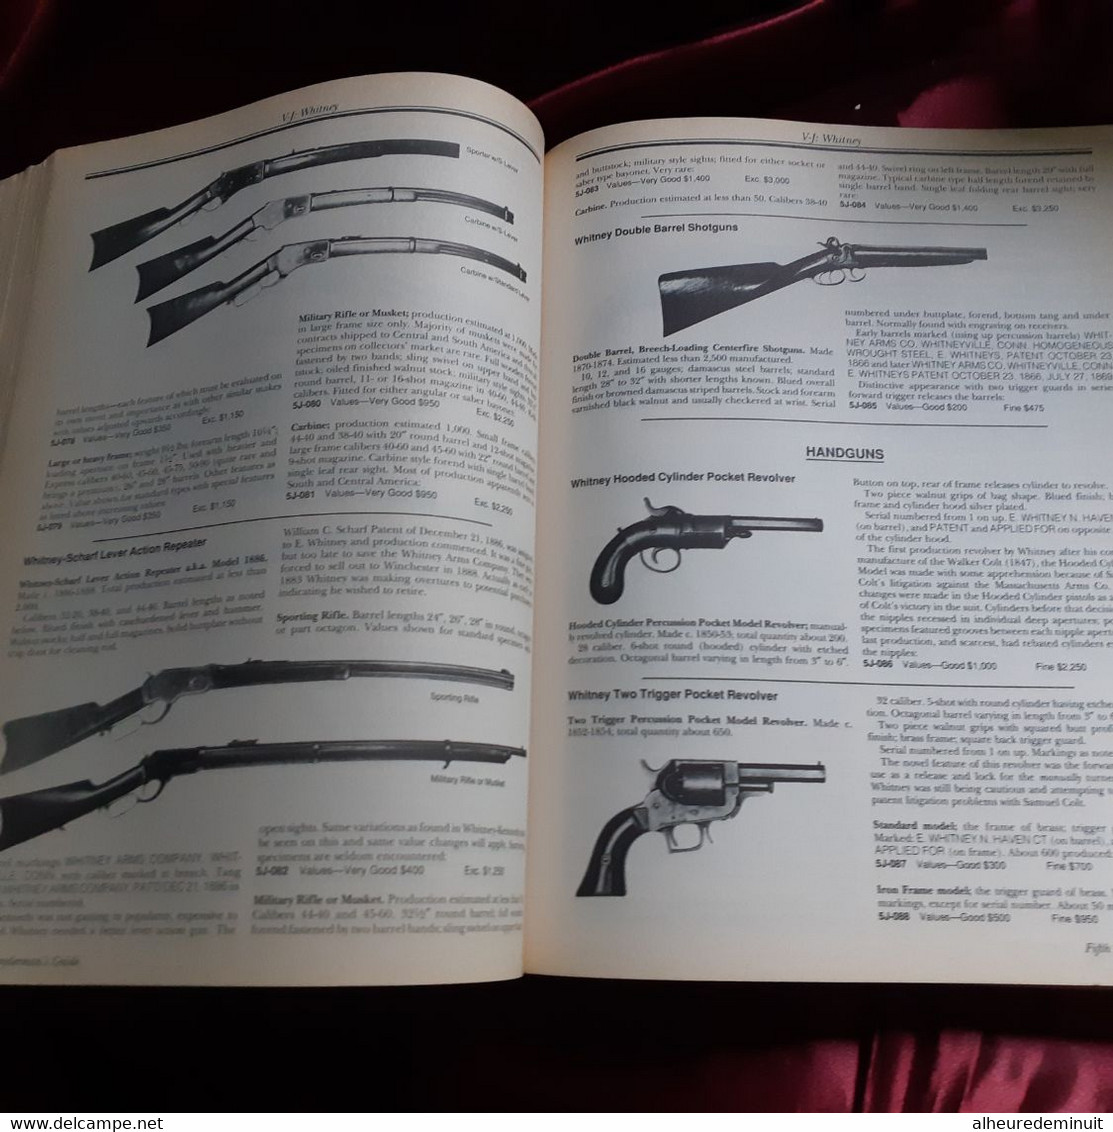 Flayderman's Guide To Antique American Firearms"1990"Armes"fusils"révolvers"complete Handbook Of American Gun Collecting - US-Force